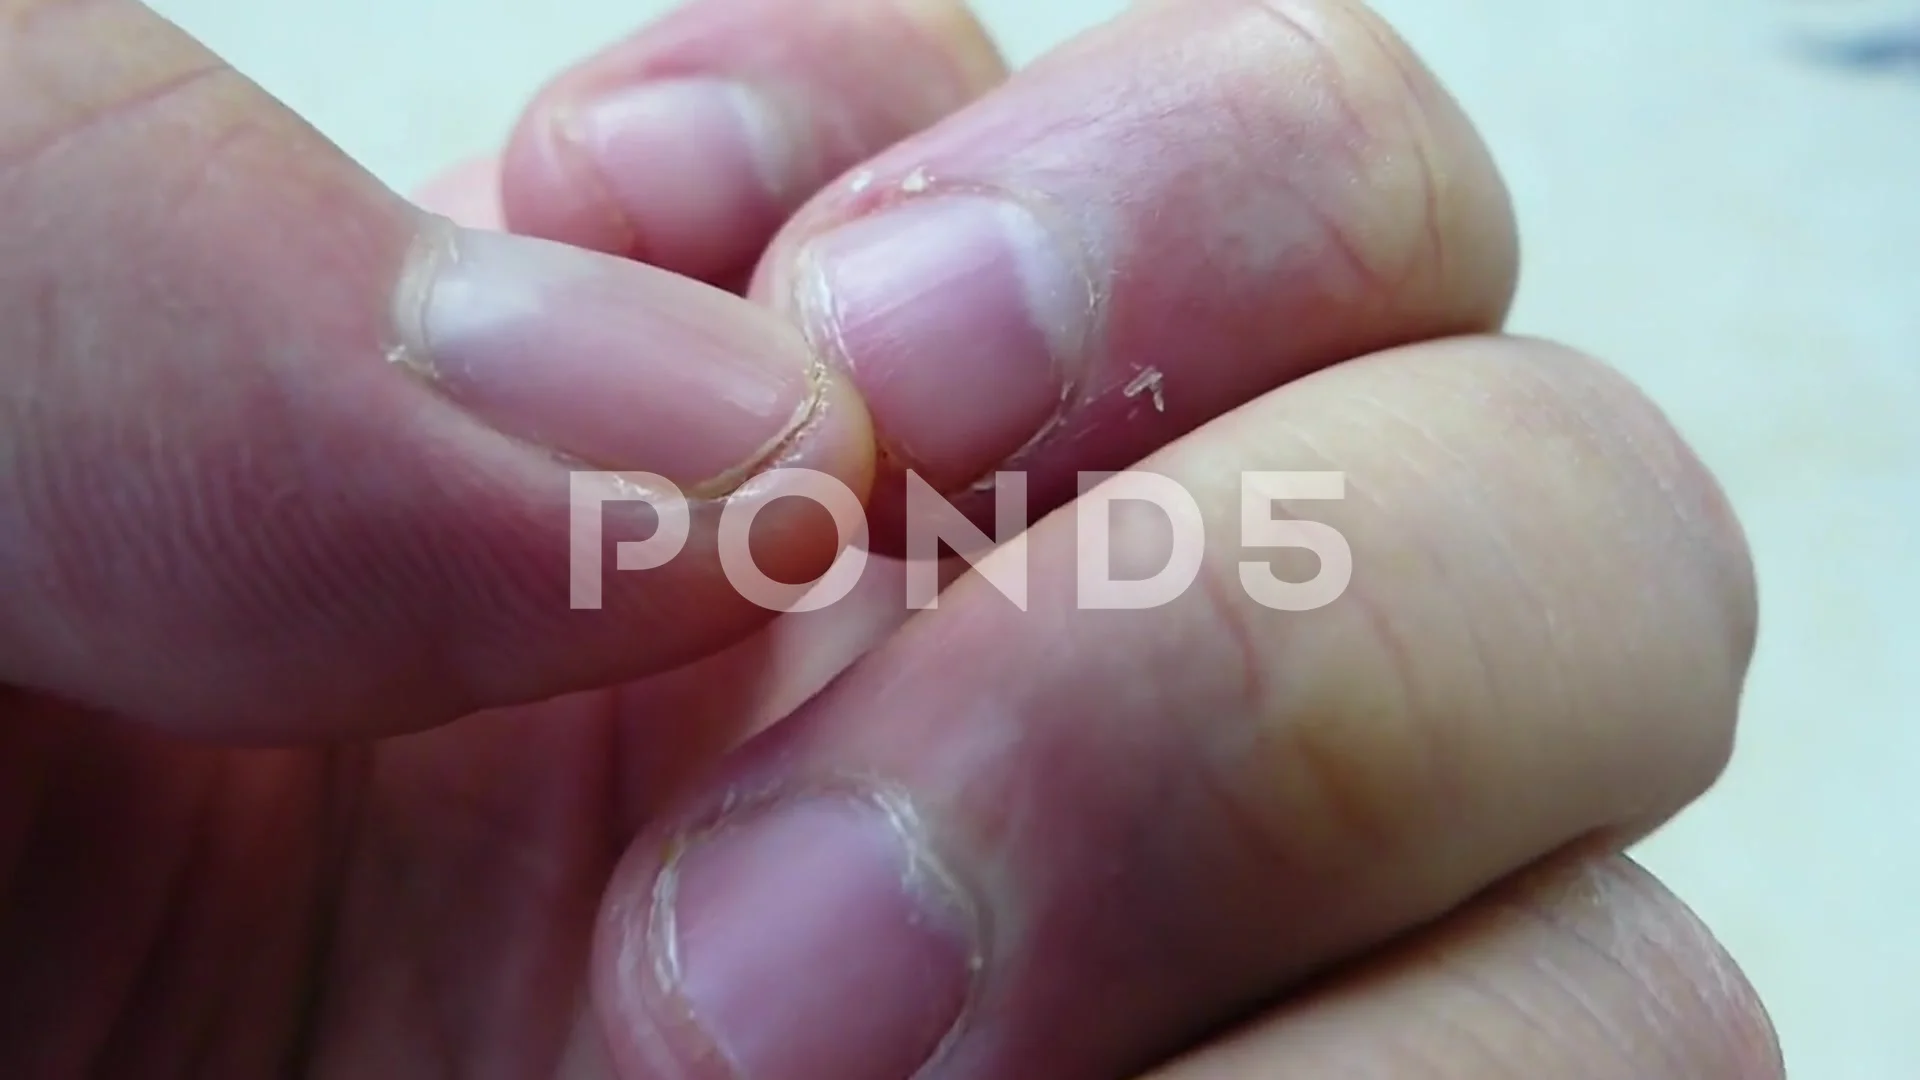 Hard, Annoying Skin Around the Nails? 2 Easy Solutions - YouTube